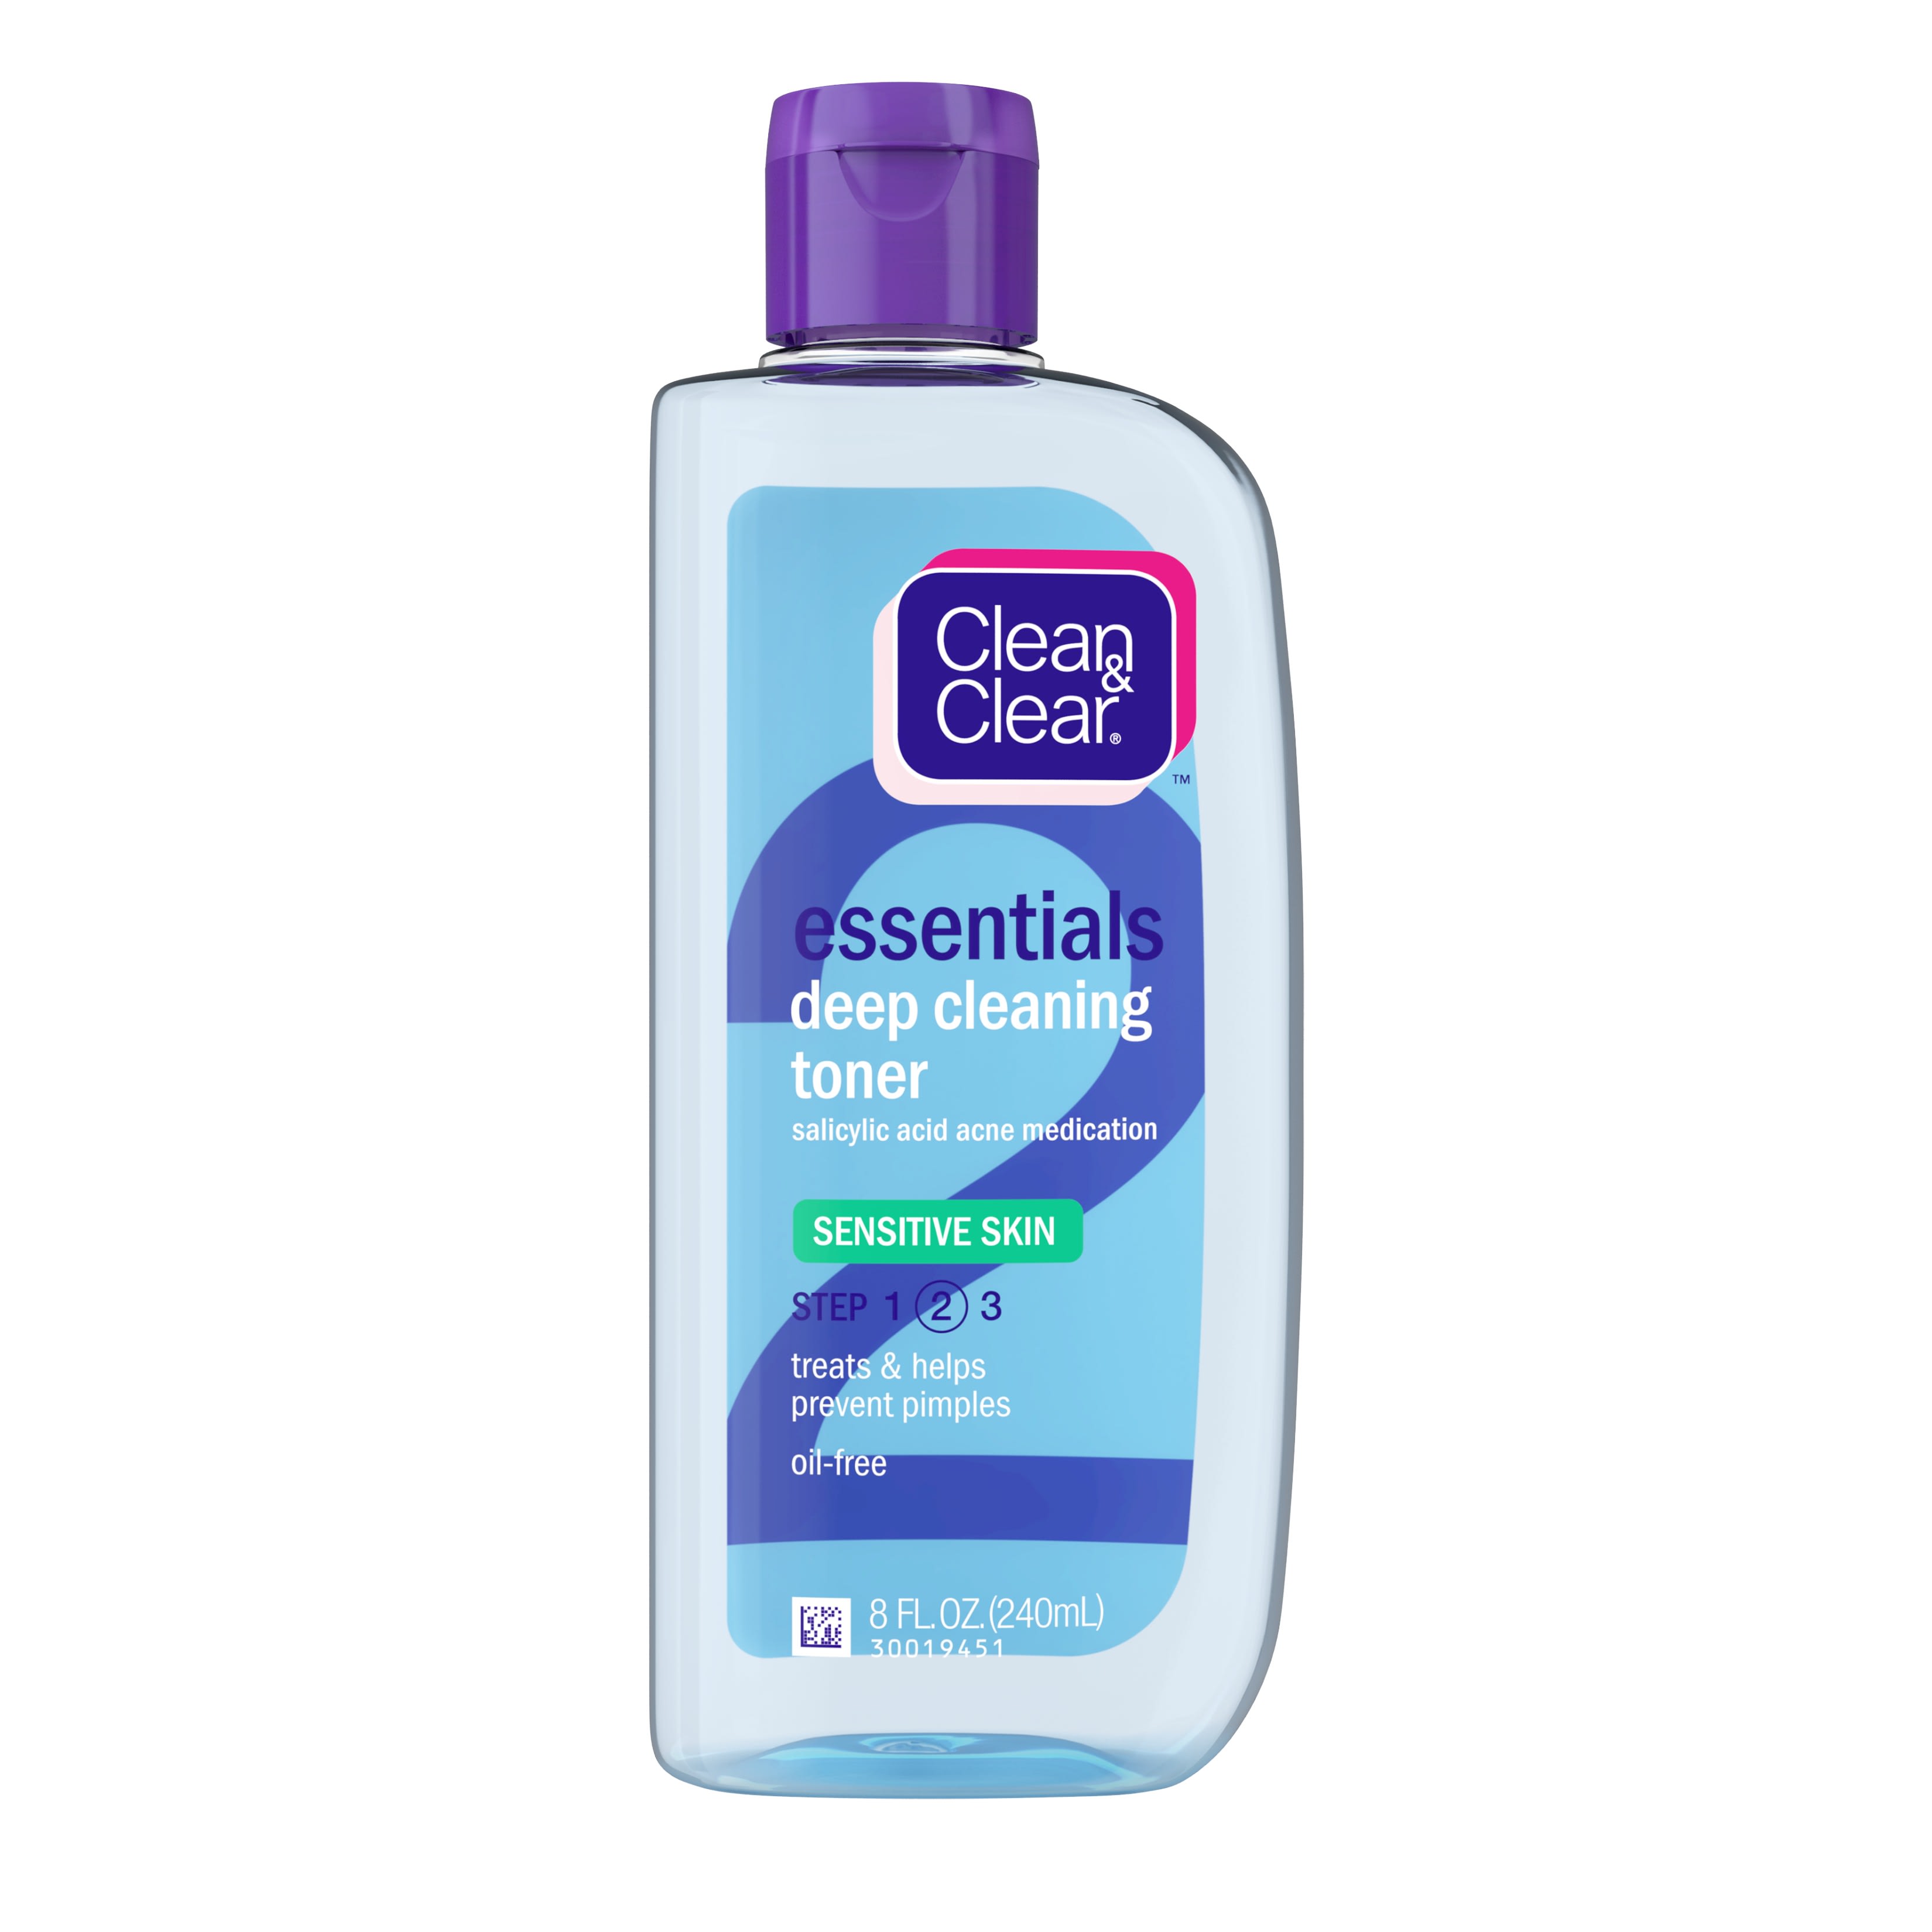 Clean & Clear Essentials Deep Cleaning Face Toner with Salicylic Acid Acne Medicine, Oil-Free Facial Toner for Sensitive & Acne-Prone Skin Care, 8 fl. oz - image 1 of 8